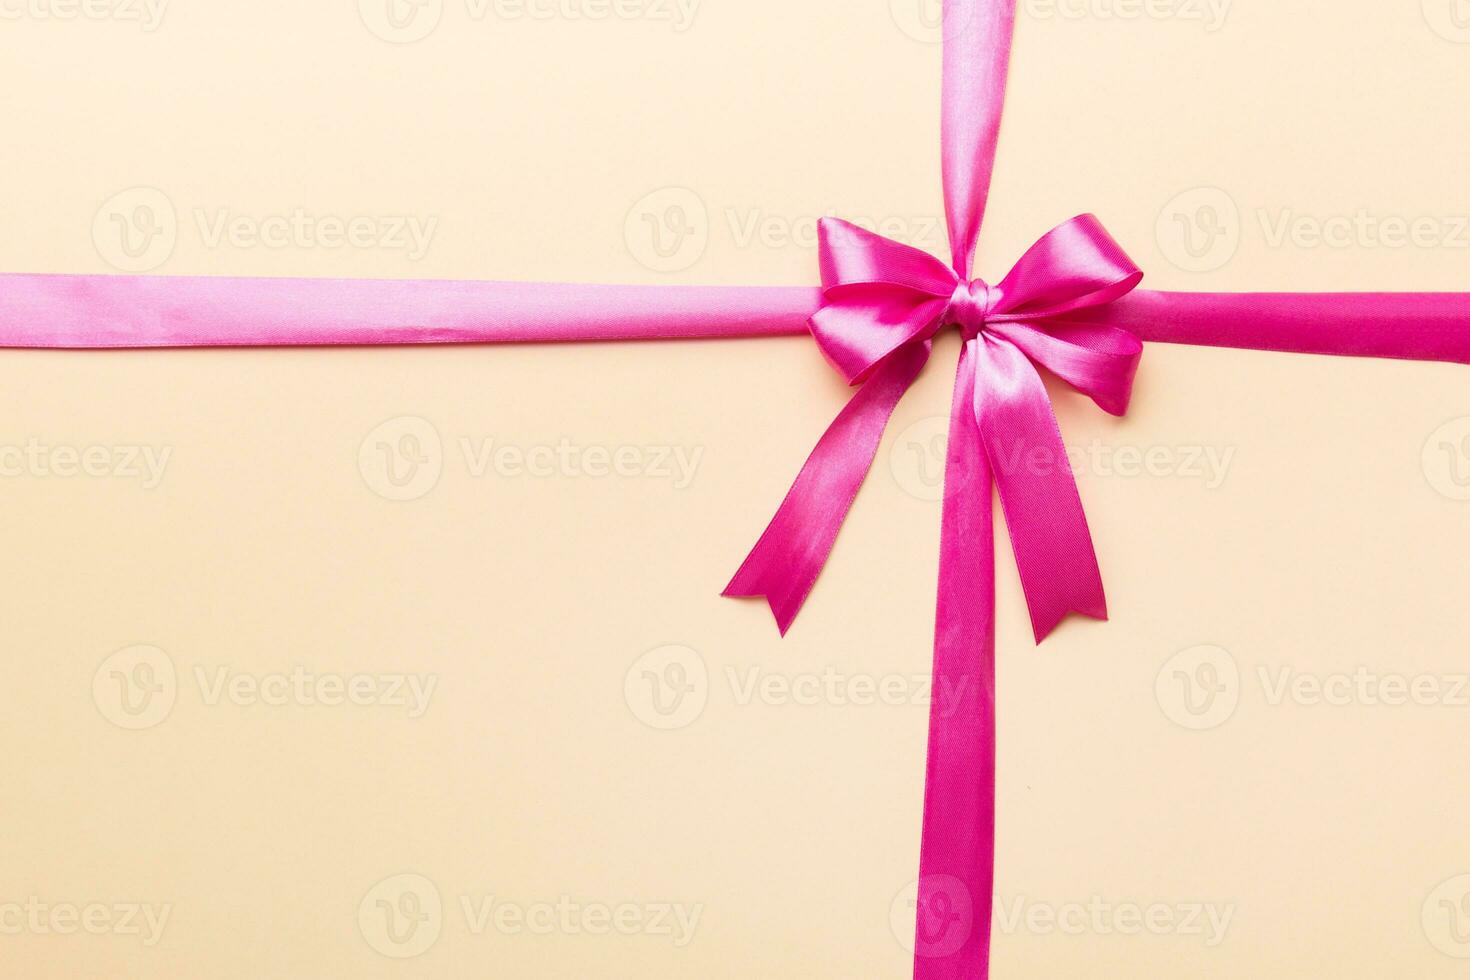 Realistic Decorative Bow Gift Ribbon Gift Box Isolated Pink Background  Stock Photo by ©CheersGroup 615352402